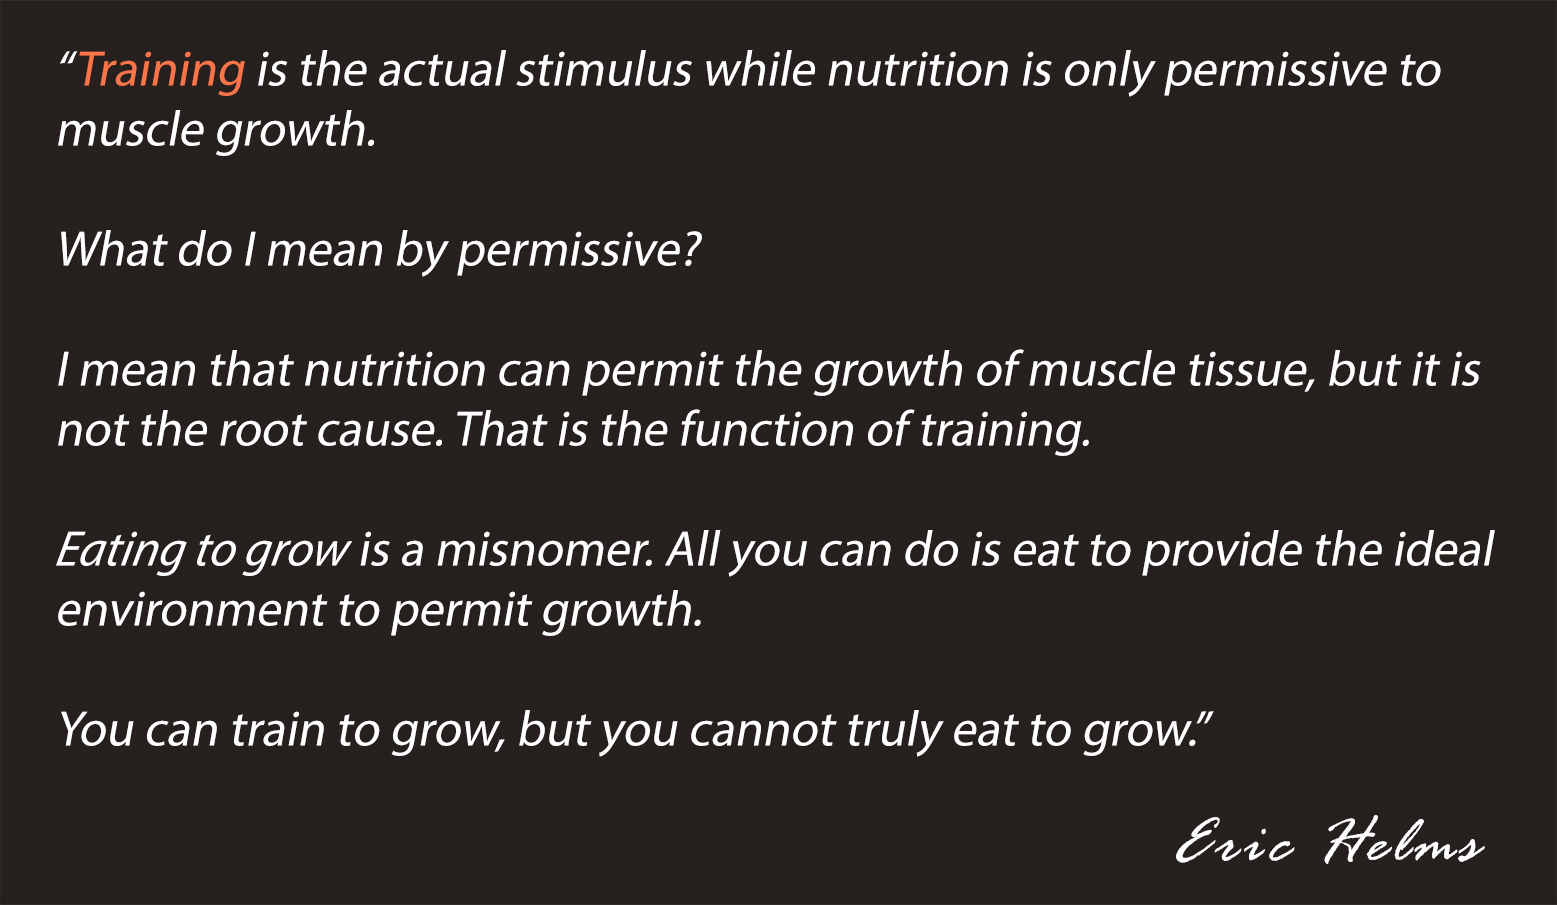 Nutrition is only permissive. Eric Helms